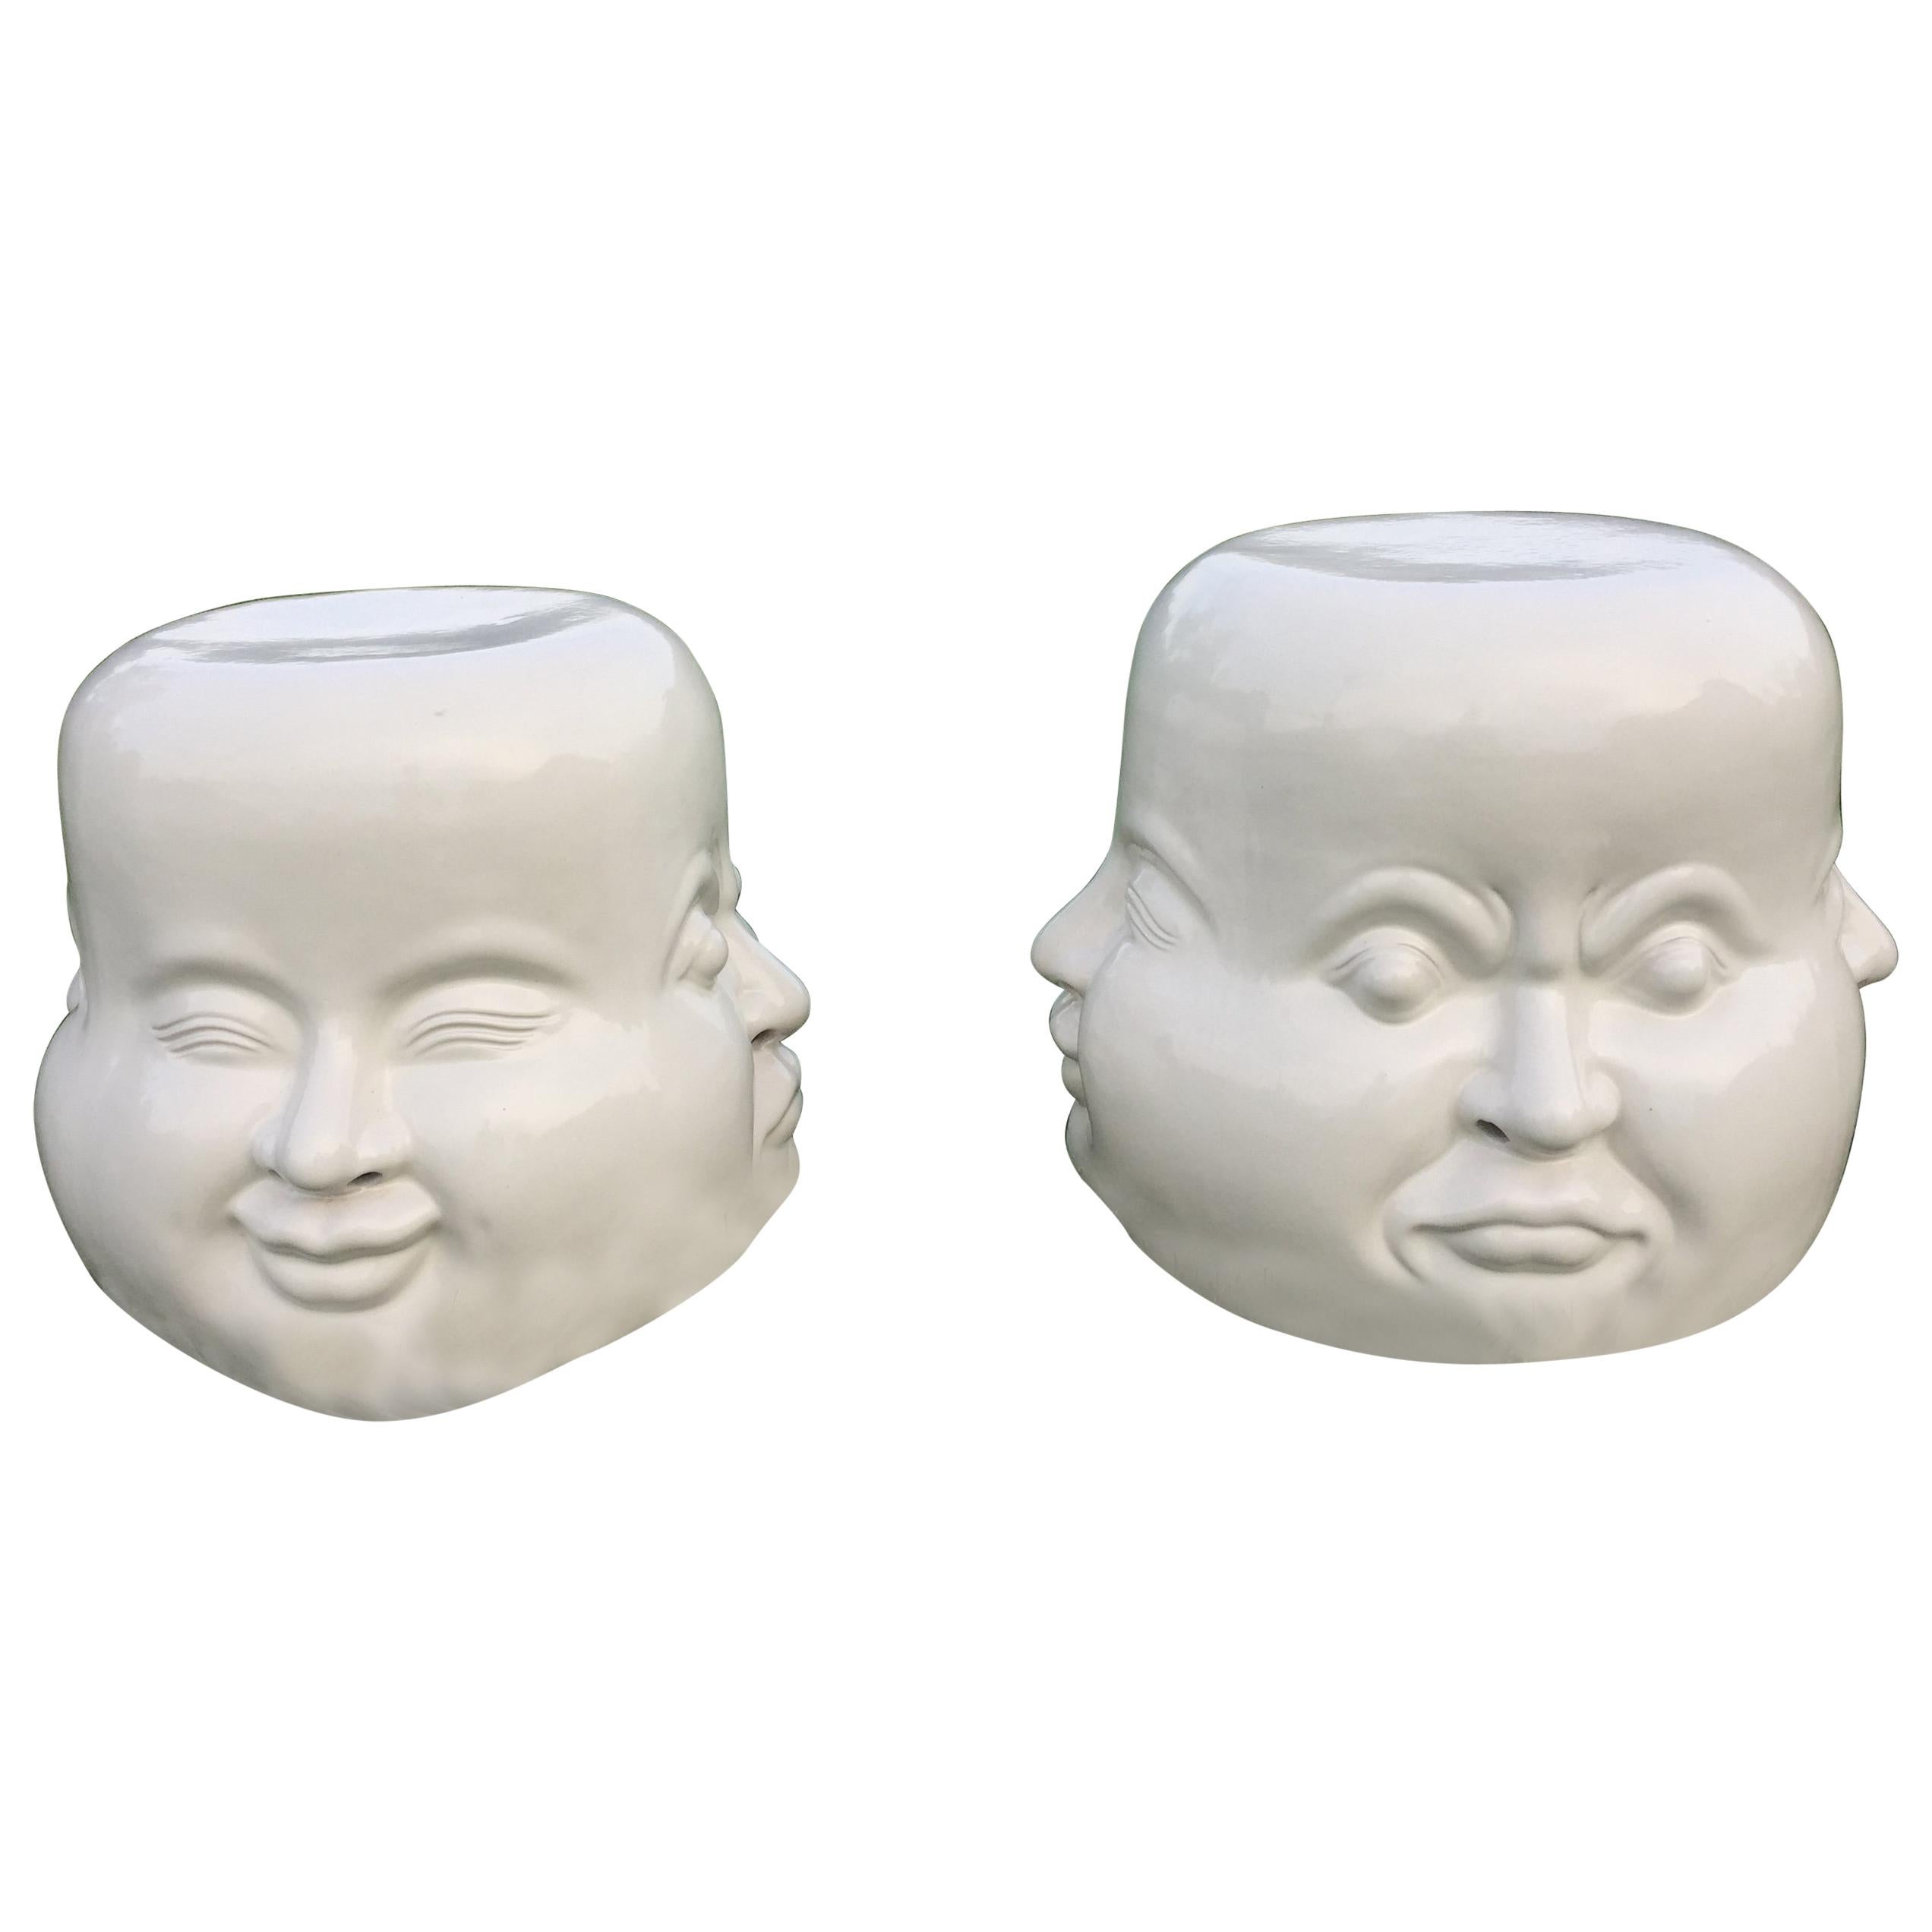 Pair of Whimsical Blanc de Chine Garden Seat End Tables with Faces